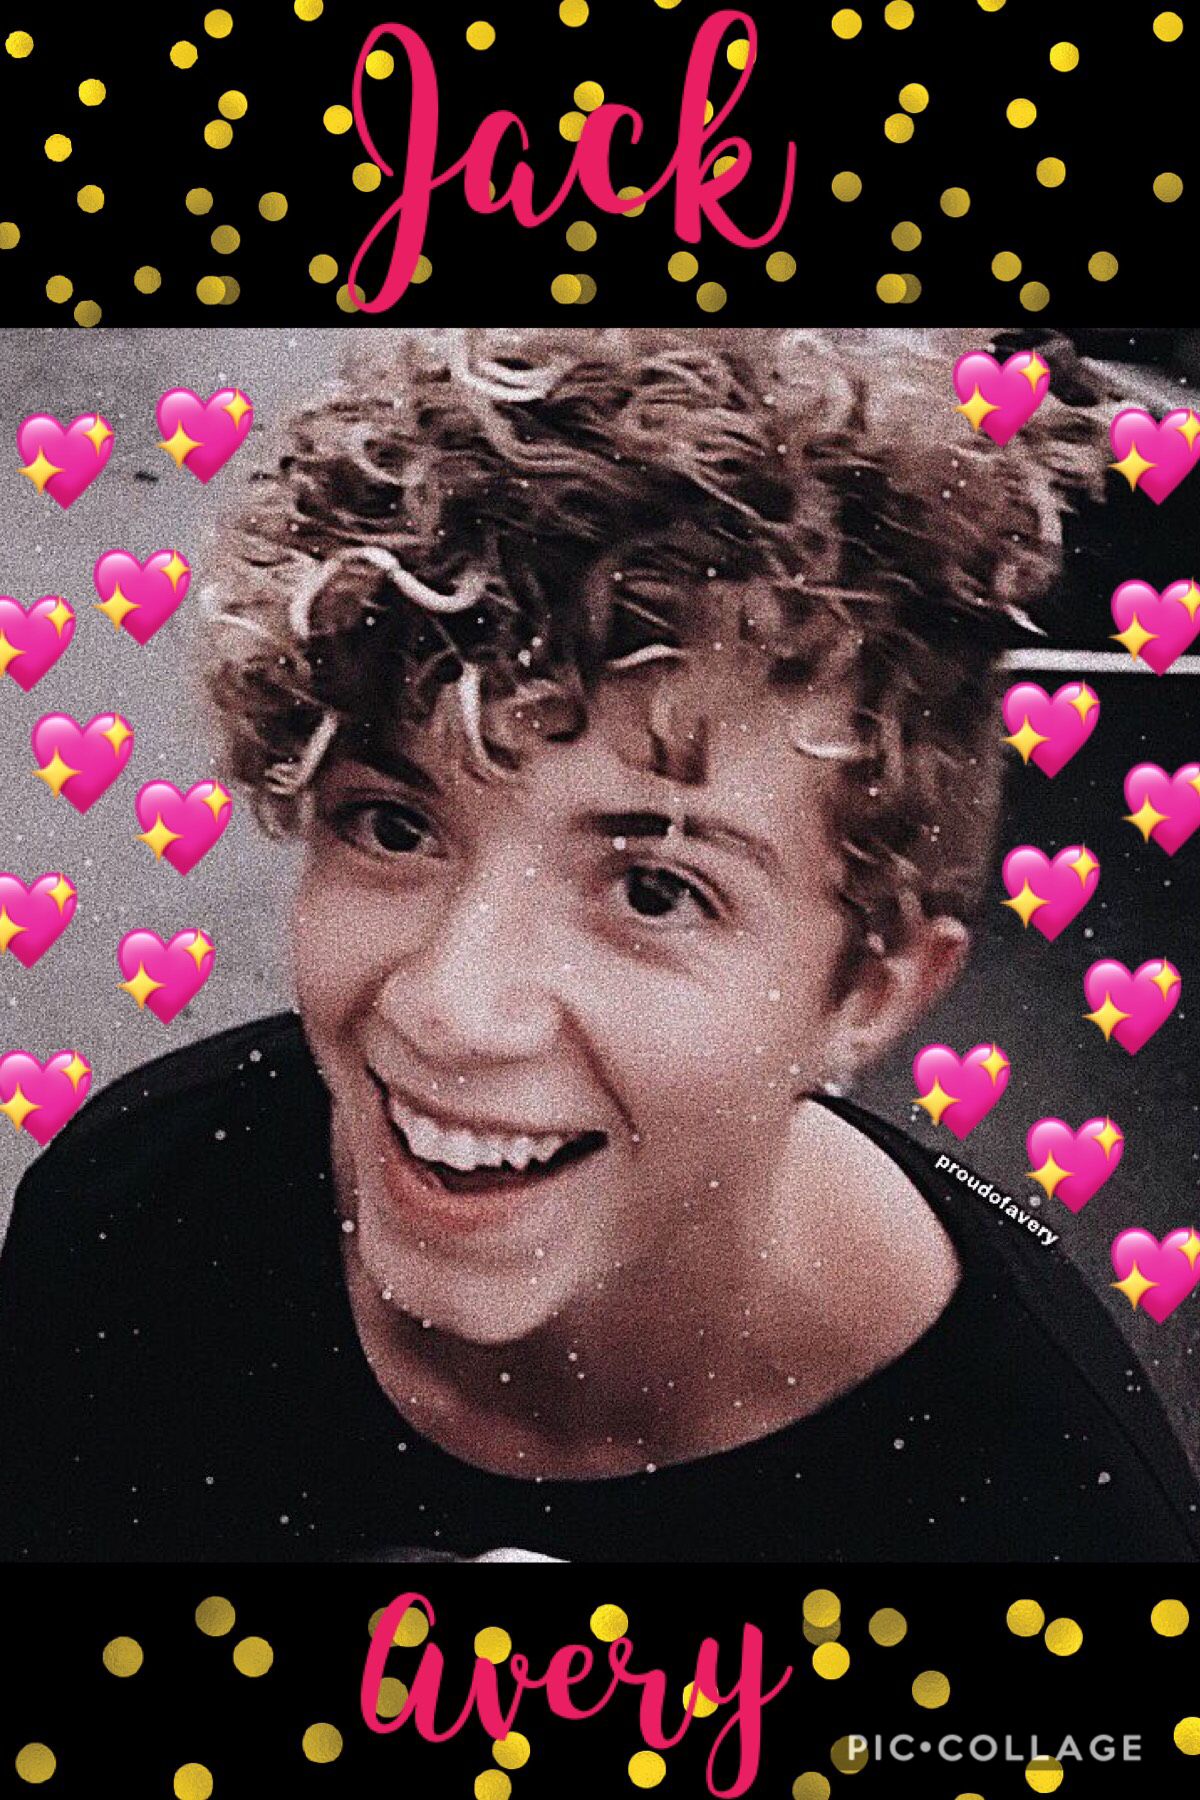 I know this is rlly bad but I haven’t thought of anything to post lately so Ig i hope u like it. (I honestly just rlly wanted to use this picture💖💖🖤)